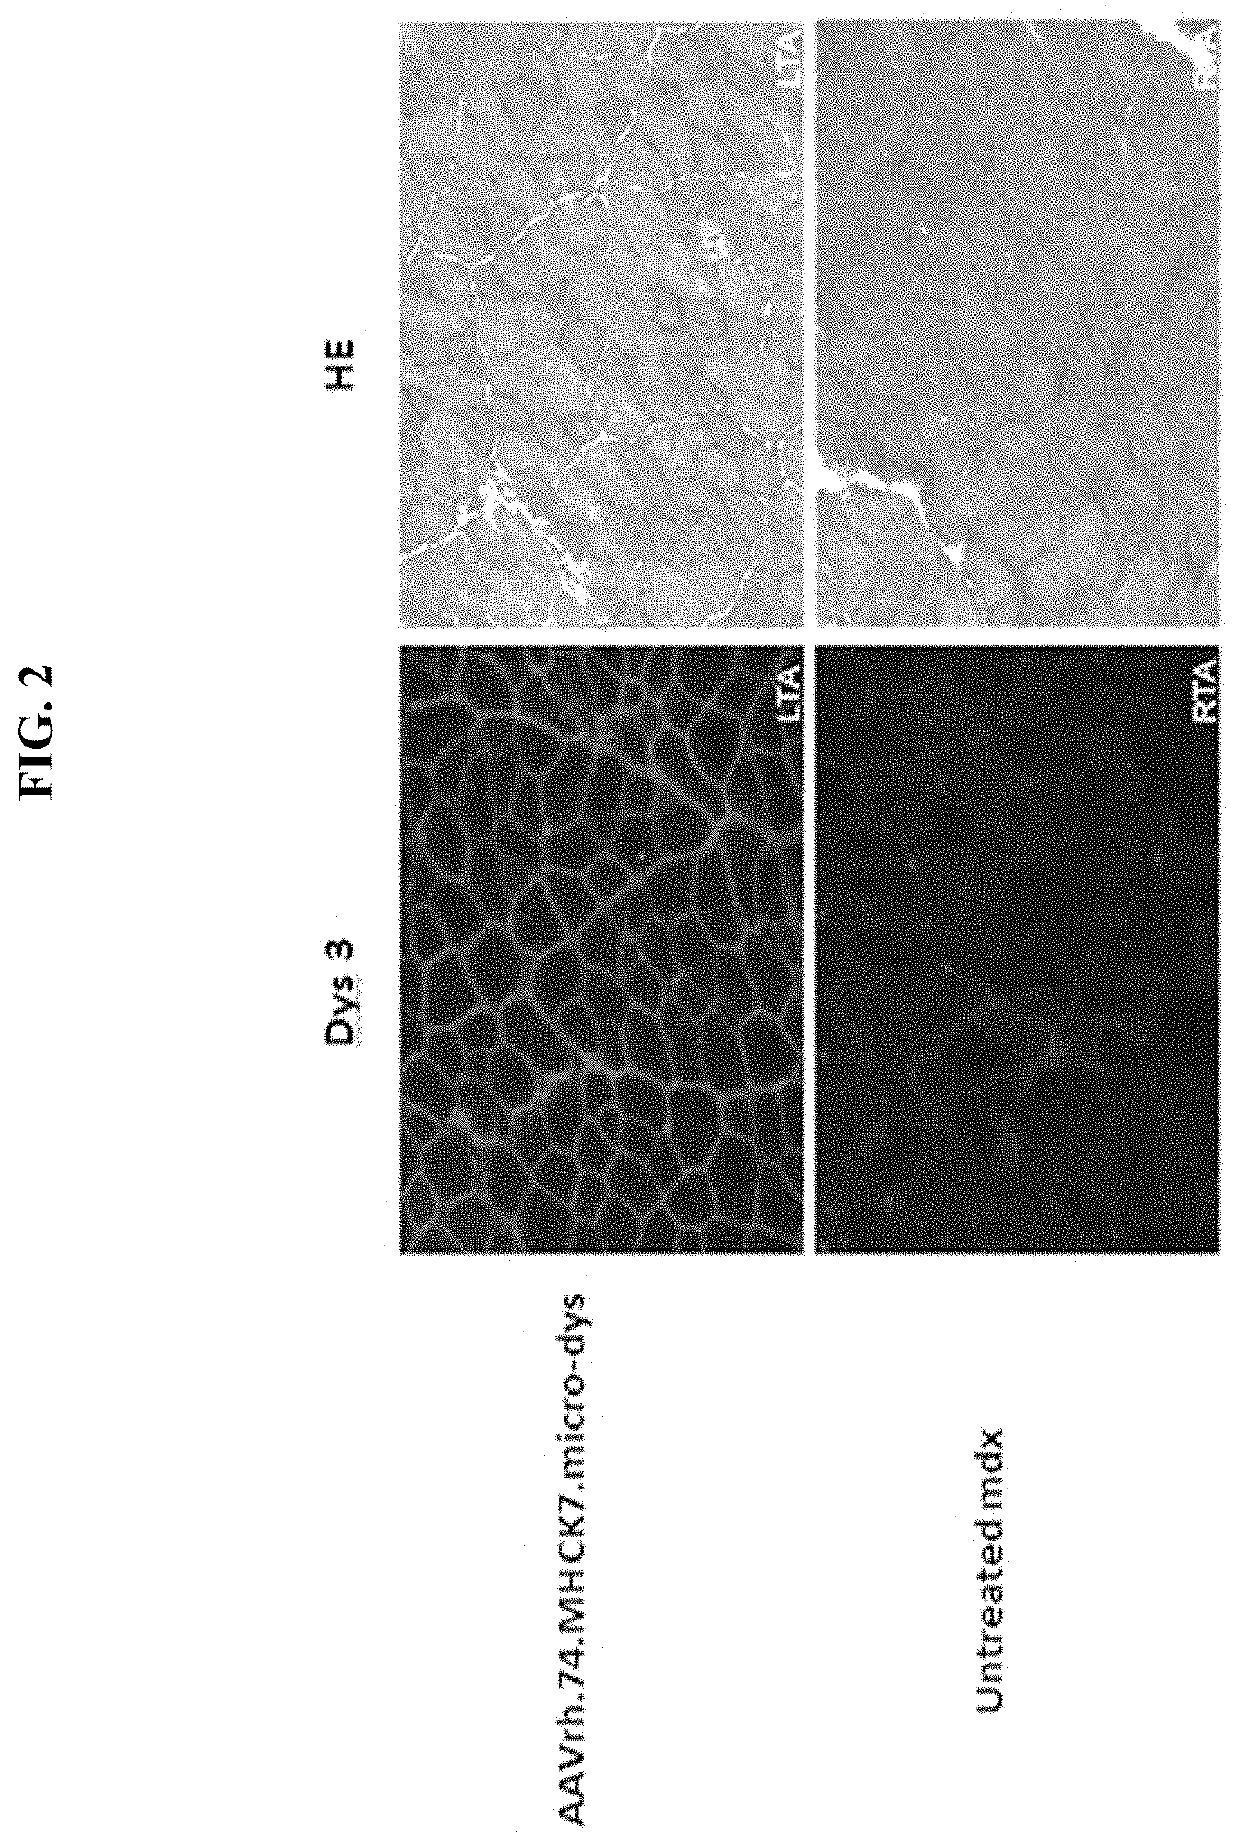 Adeno-Associated Virus Vector Delivery of Muscle Specific Micro-Dystrophin To Treat Muscular Dystrophy